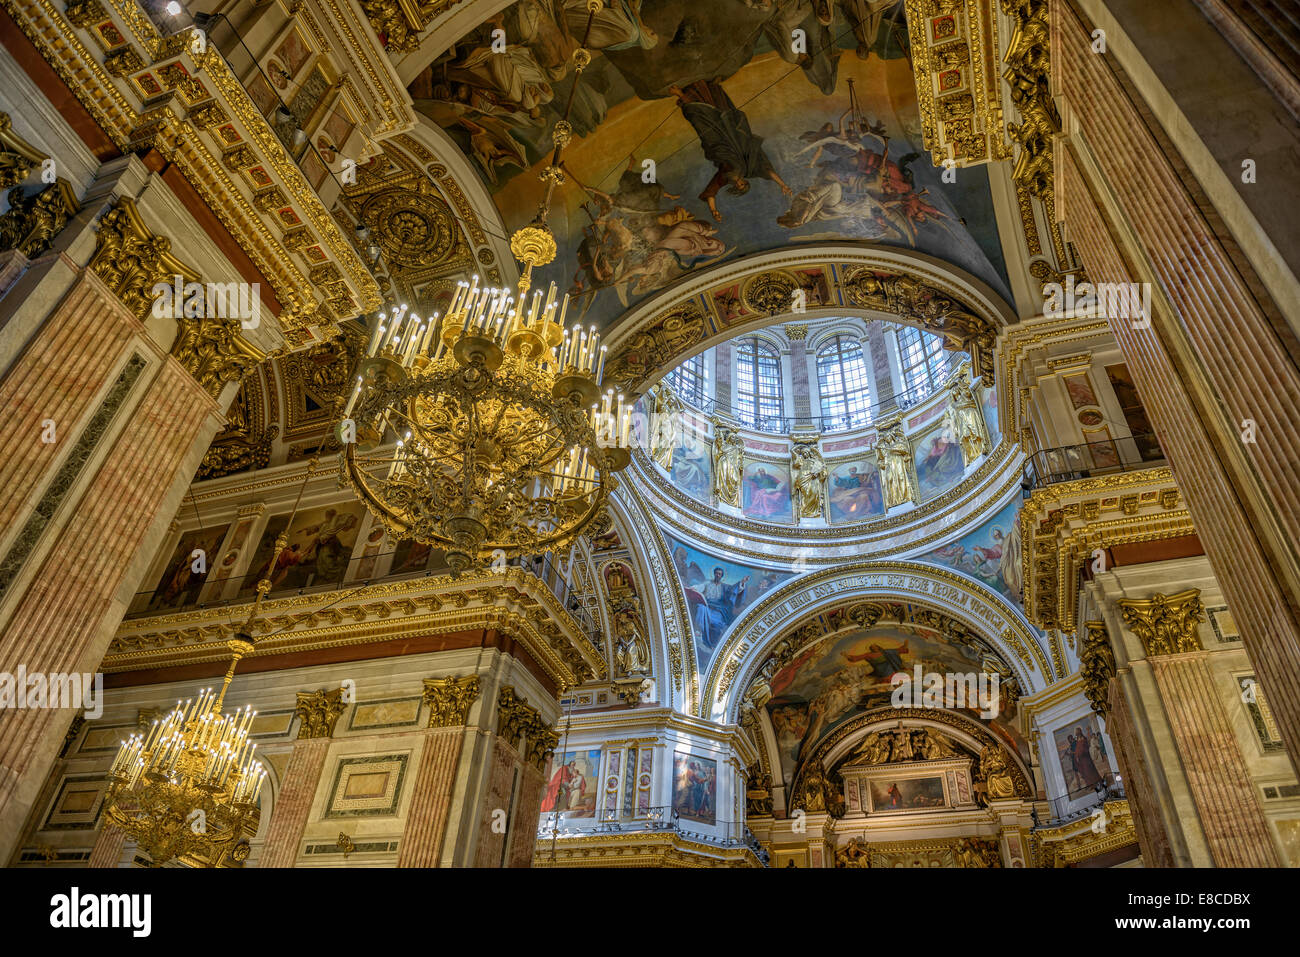 Interior of Saint Isaac's Cathedral in St. Petersburg. Russia Stock Photo